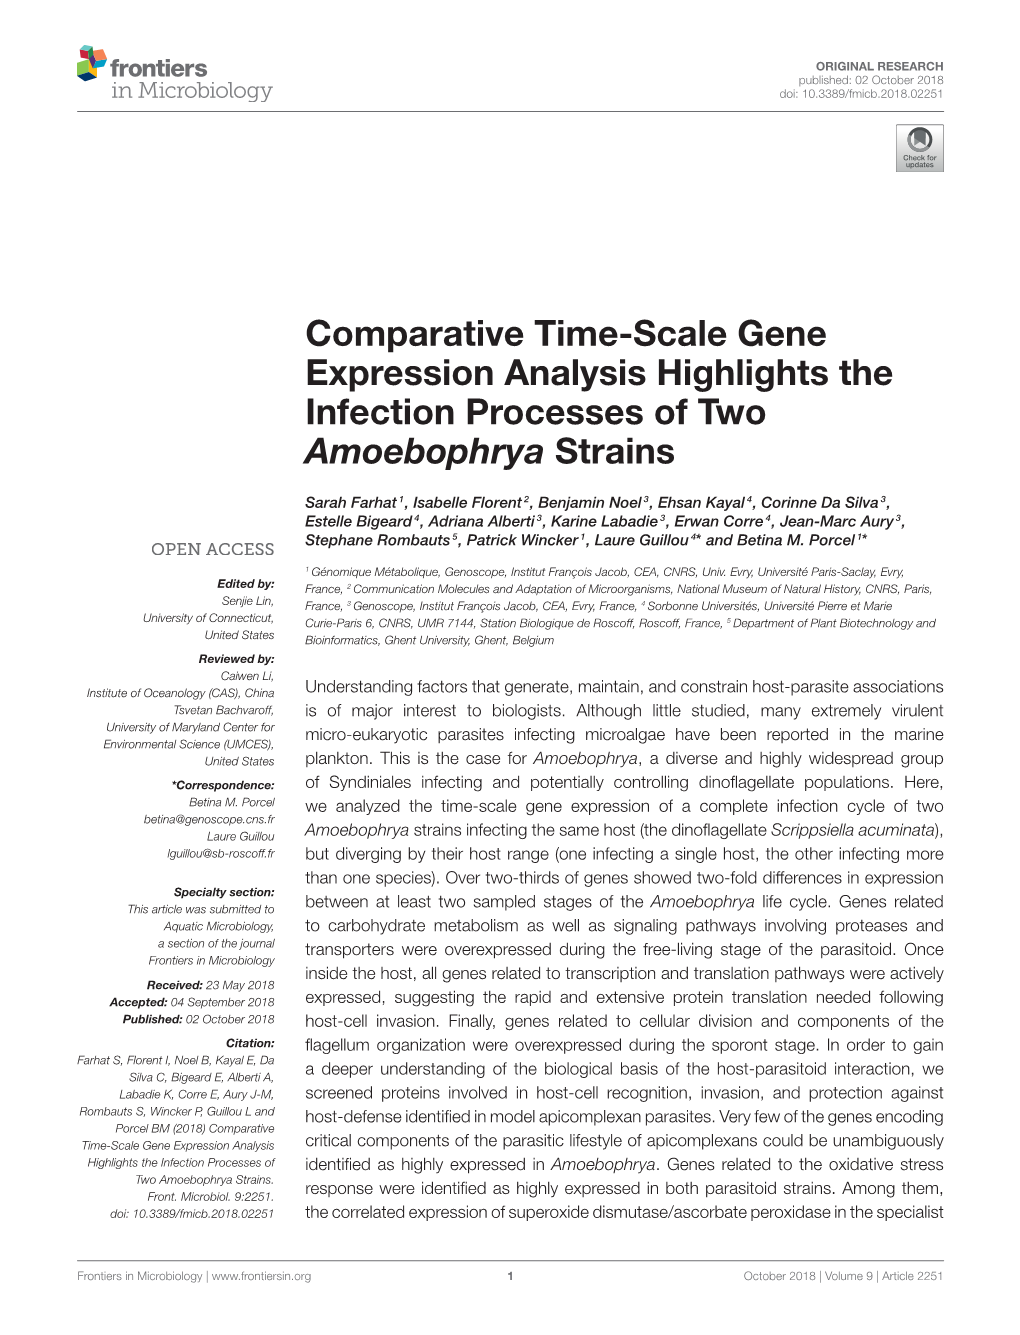 Comparative Time-Scale Gene Expression Analysis Highlights the Infection Processes of Two Amoebophrya Strains